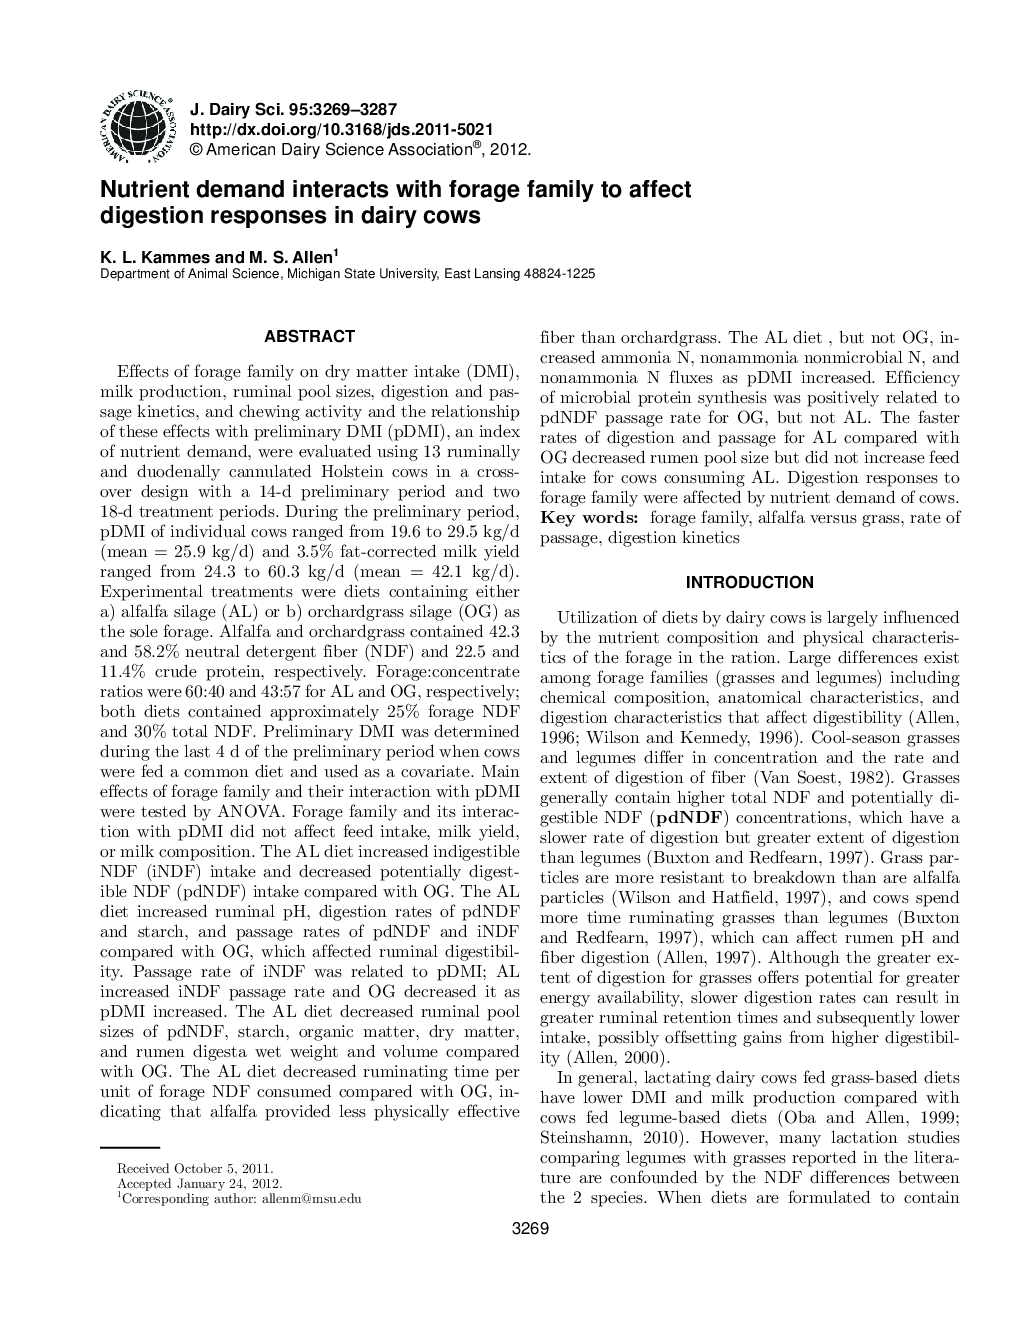 Nutrient demand interacts with forage family to affect digestion responses in dairy cows